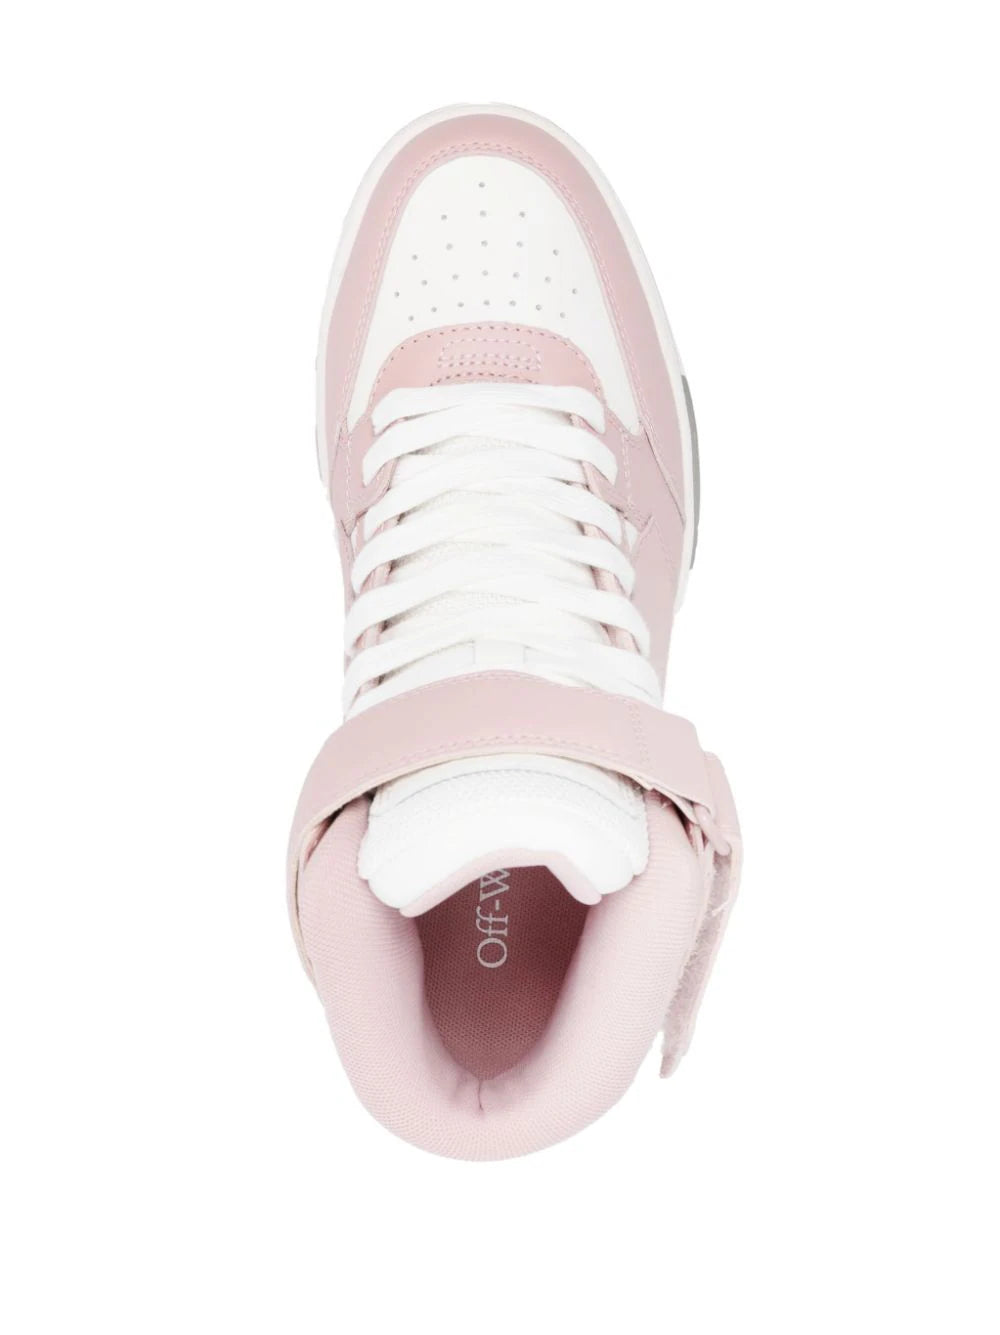 OFF-WHITE WOMEN Out Of Office Mid Top Leather Sneakers Pink/White - MAISONDEFASHION.COM